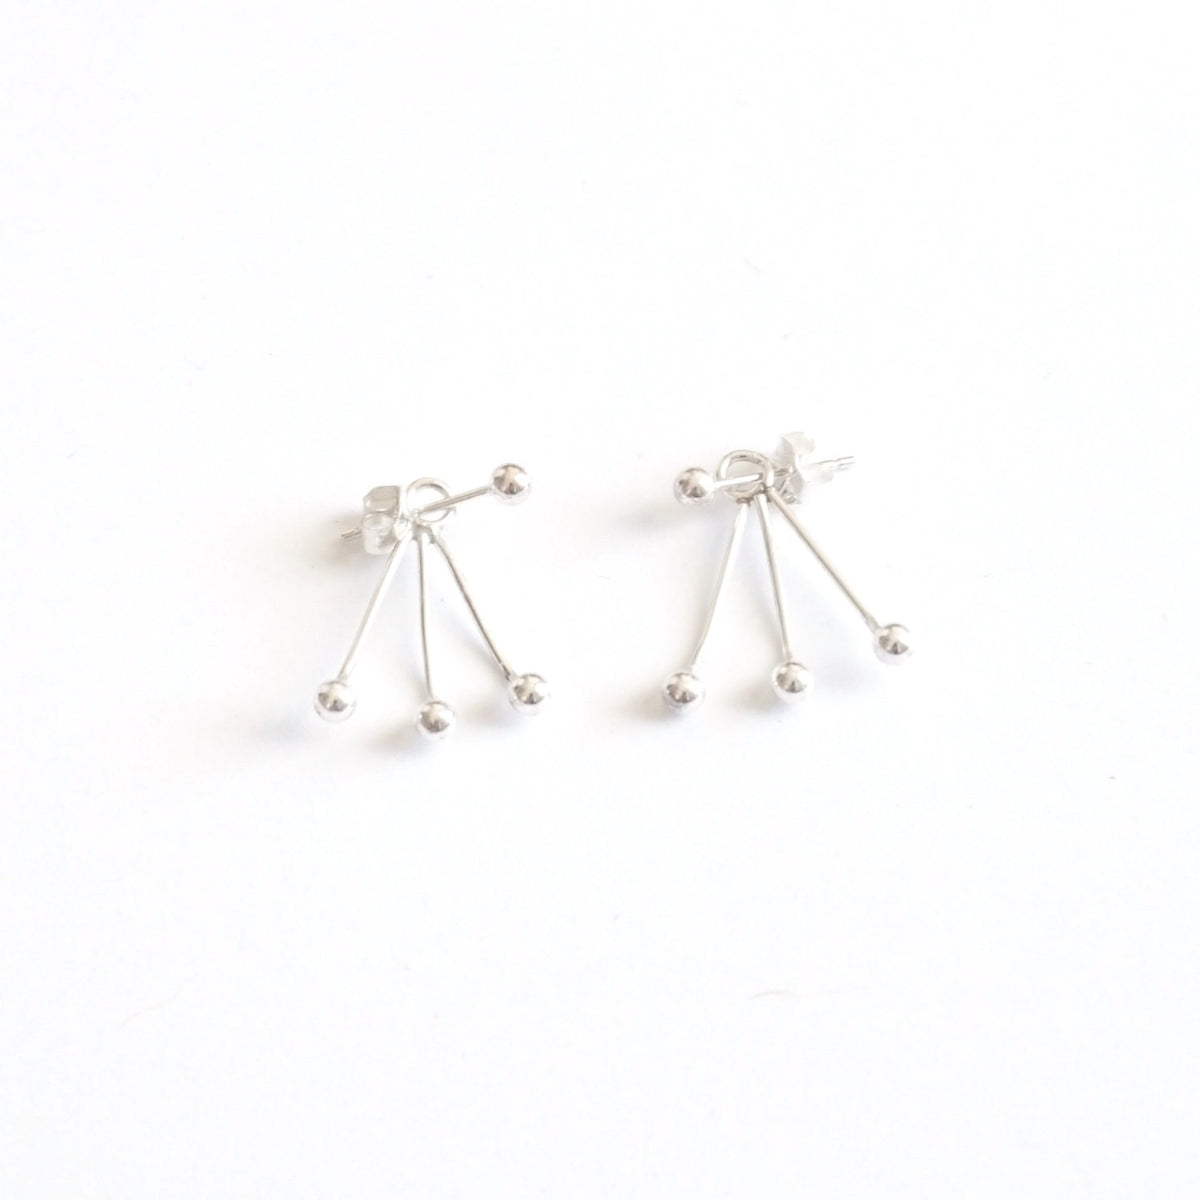 Chic and Unique - Hand-Crafted, Distinctive Triple Ball Ear Jacket Earrings - 0217 - Virginia Wynne Designs